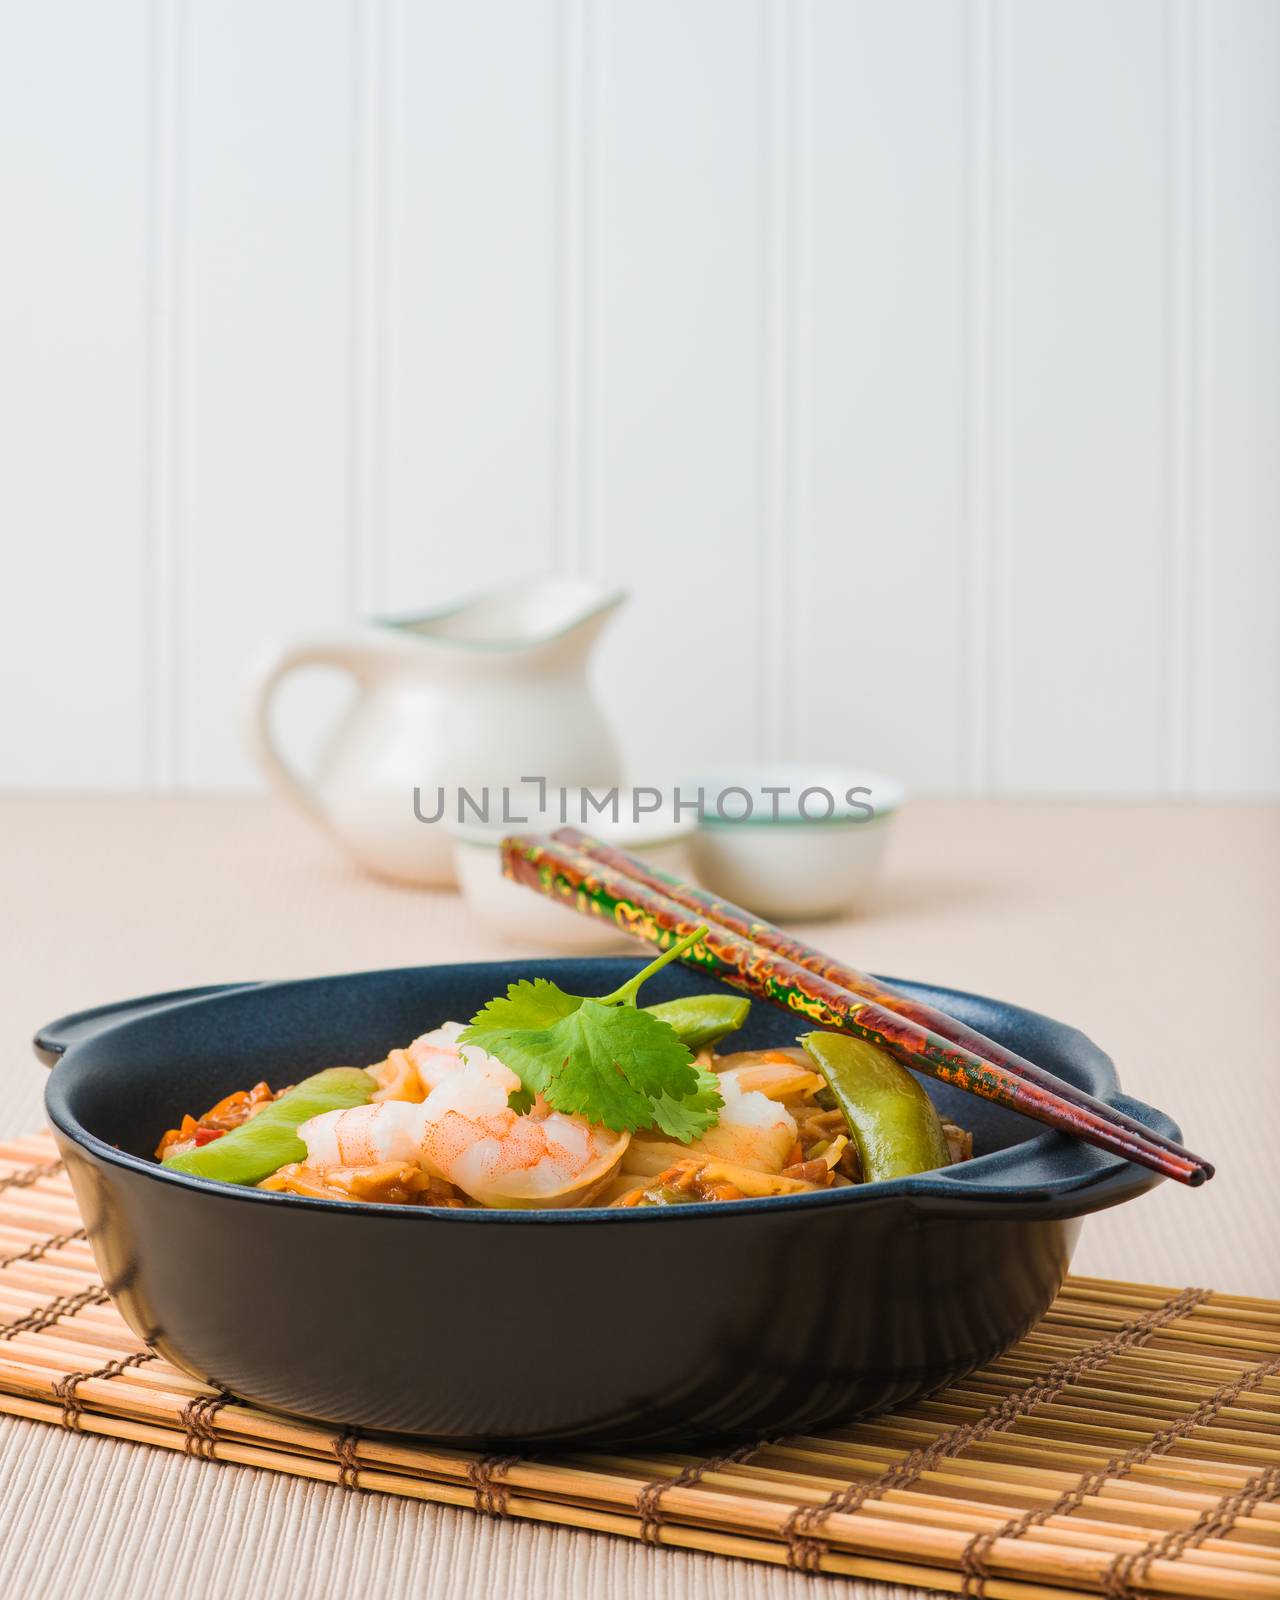 Thai Food by billberryphotography